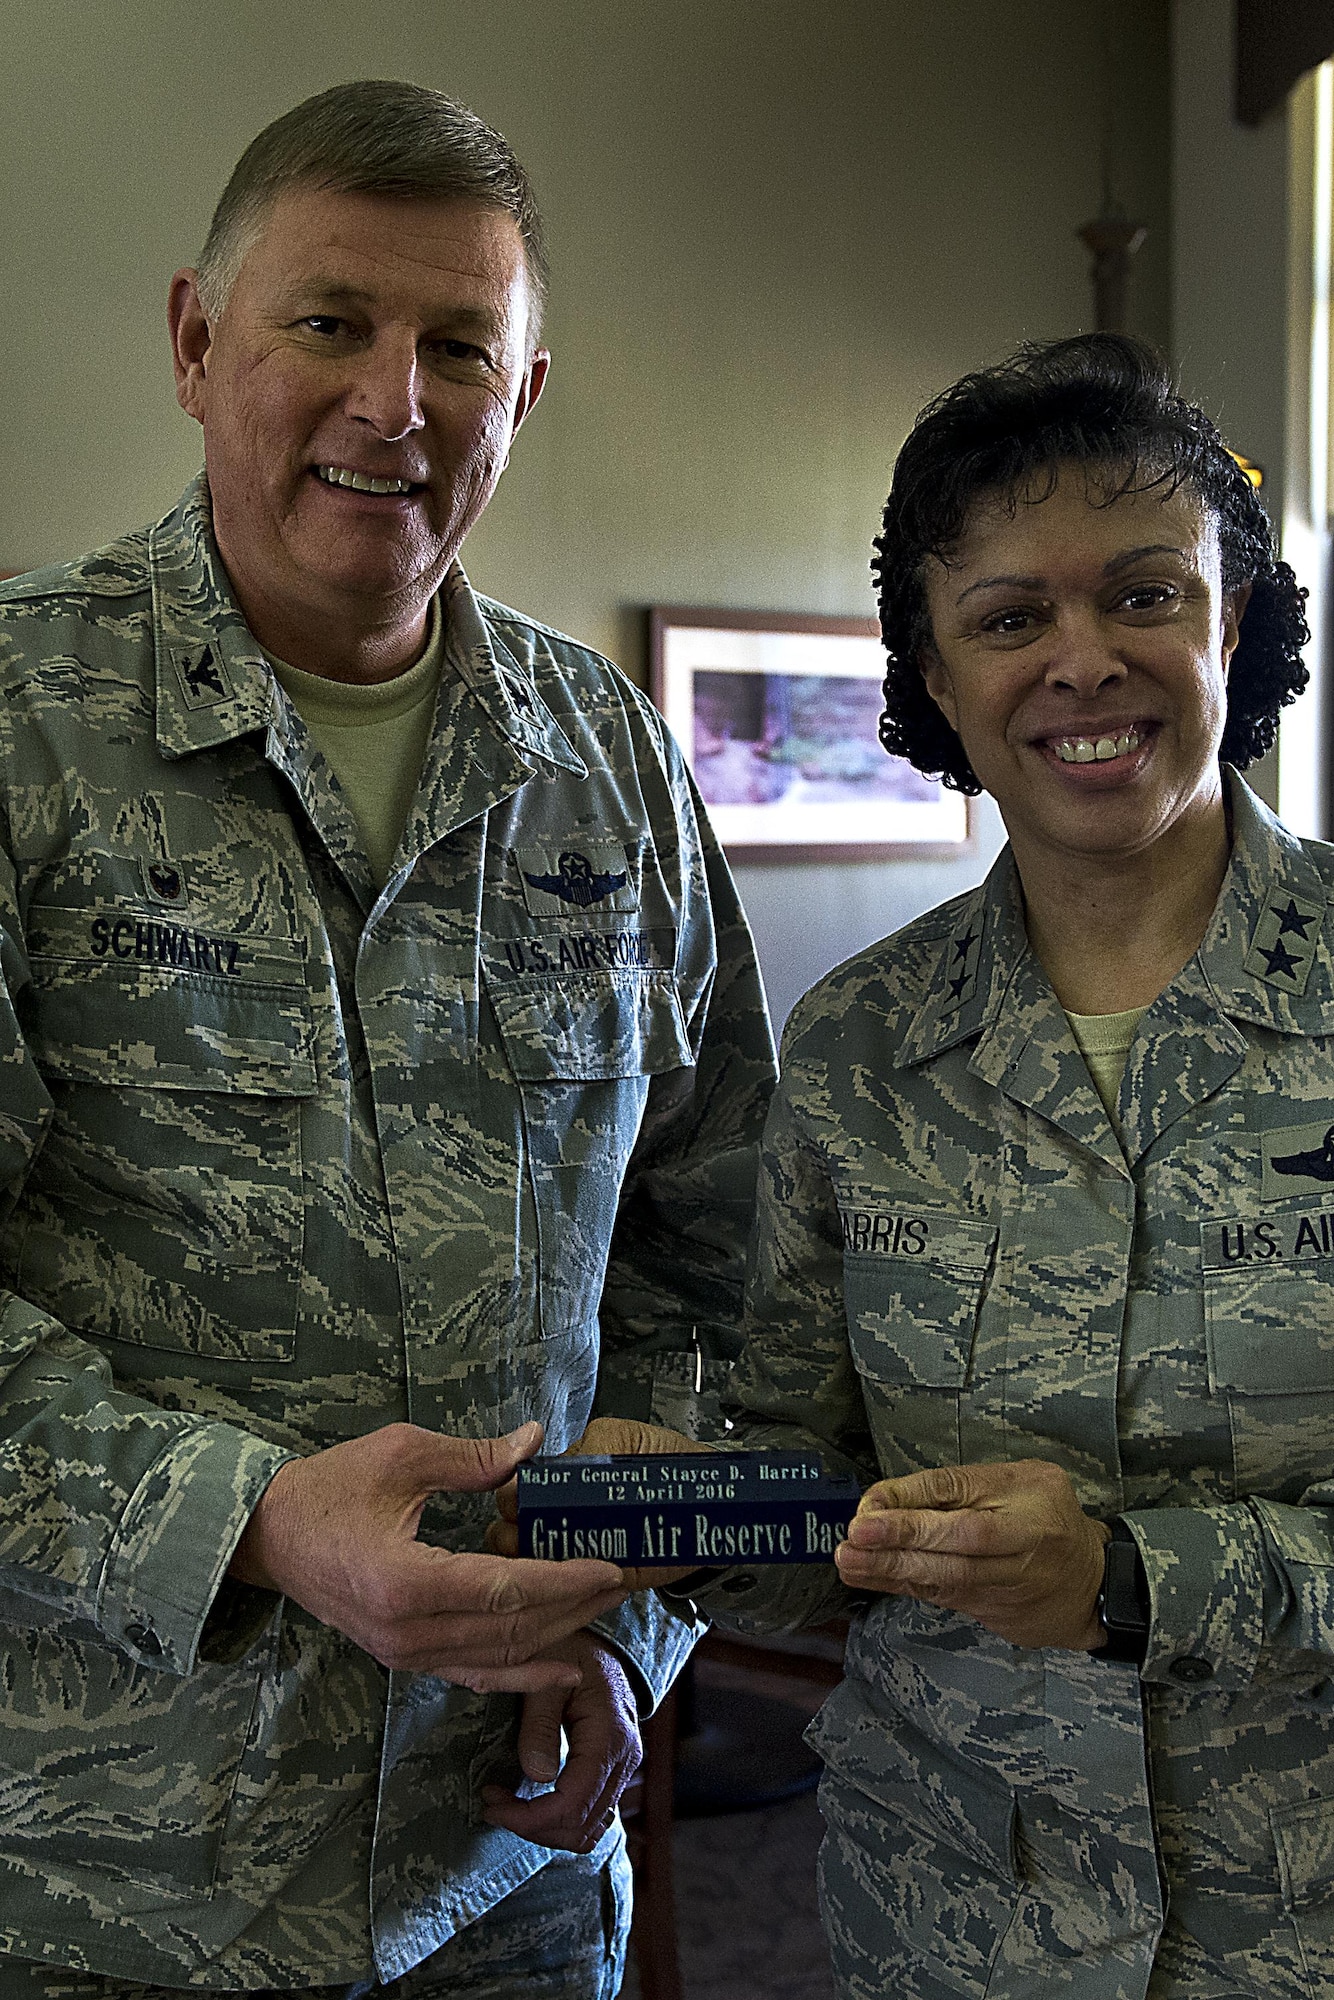 Maj. Gen. Stayce Harris, 22nd Air Force commander, presents Col. Doug Schwartz 434th Air Refueling Wing Commander with a signed chock to be displayed at Chocks April 12, 2016 at Grissom Air Reserve Base, Ind. Whenever a distinguished guest visits Grissom they are asked to sign a chock to be displayed at Chocks. (U.S. Air Force photo/Senior Airman Dakota Bergl)